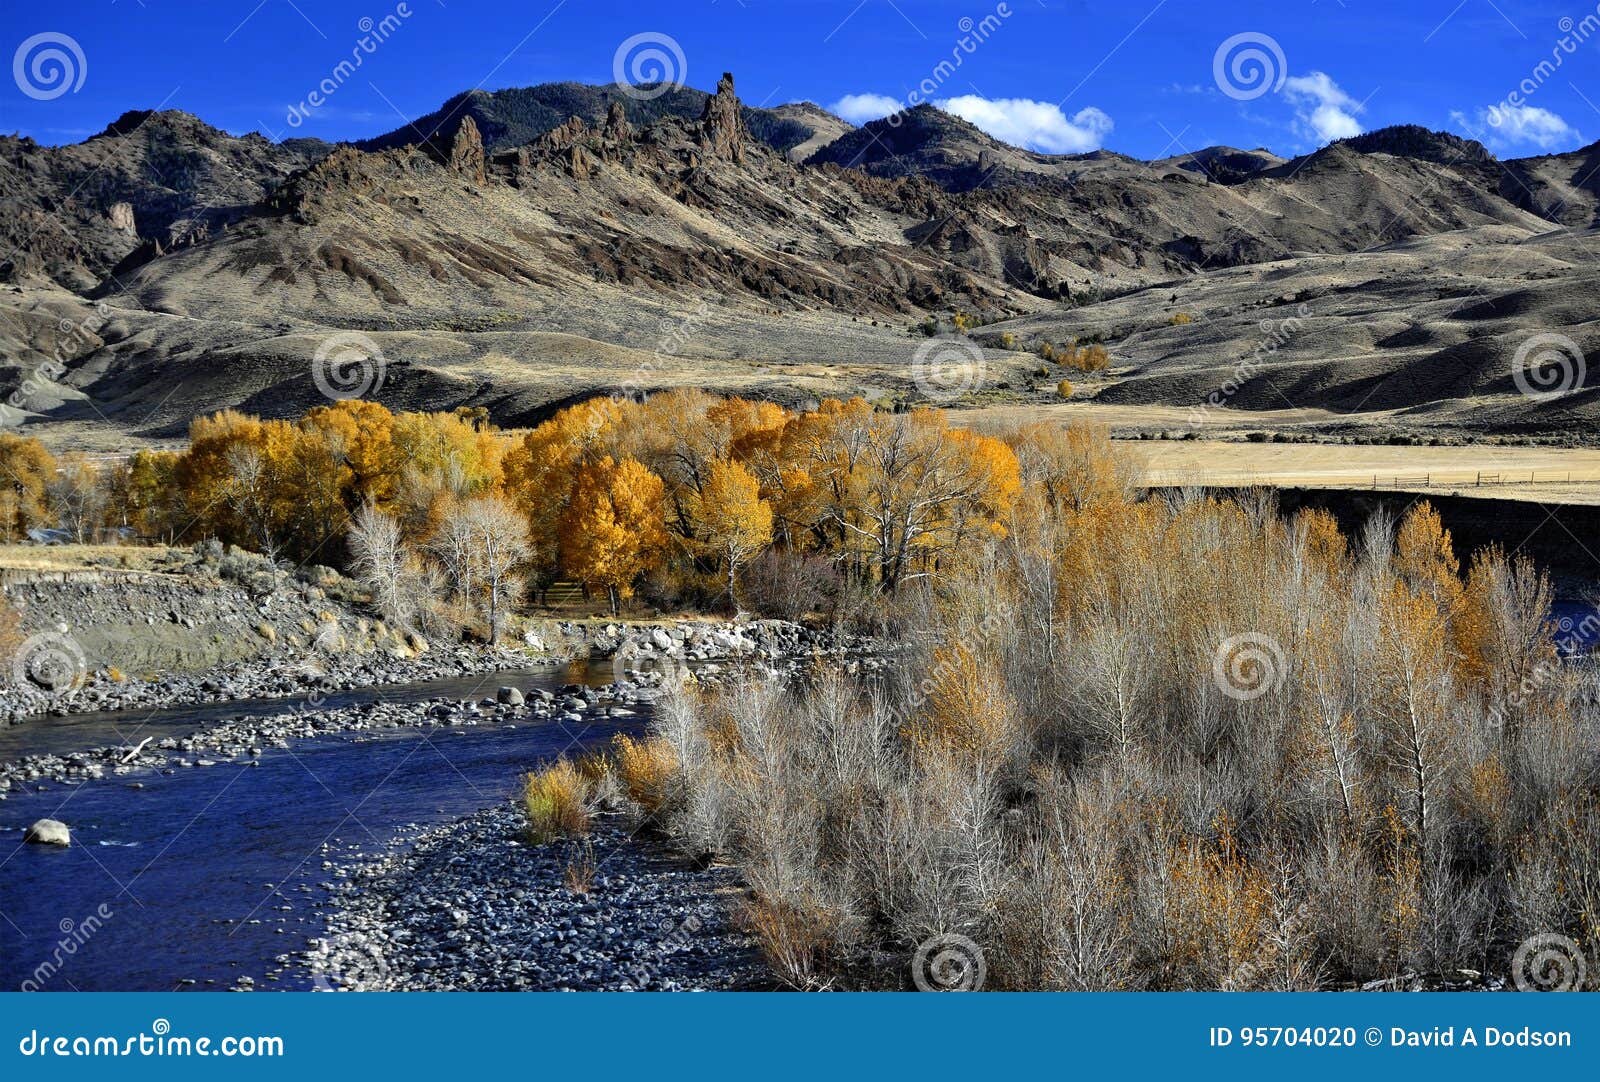 the shoshone river and dazzling autumn leaves outside cody, wyoming